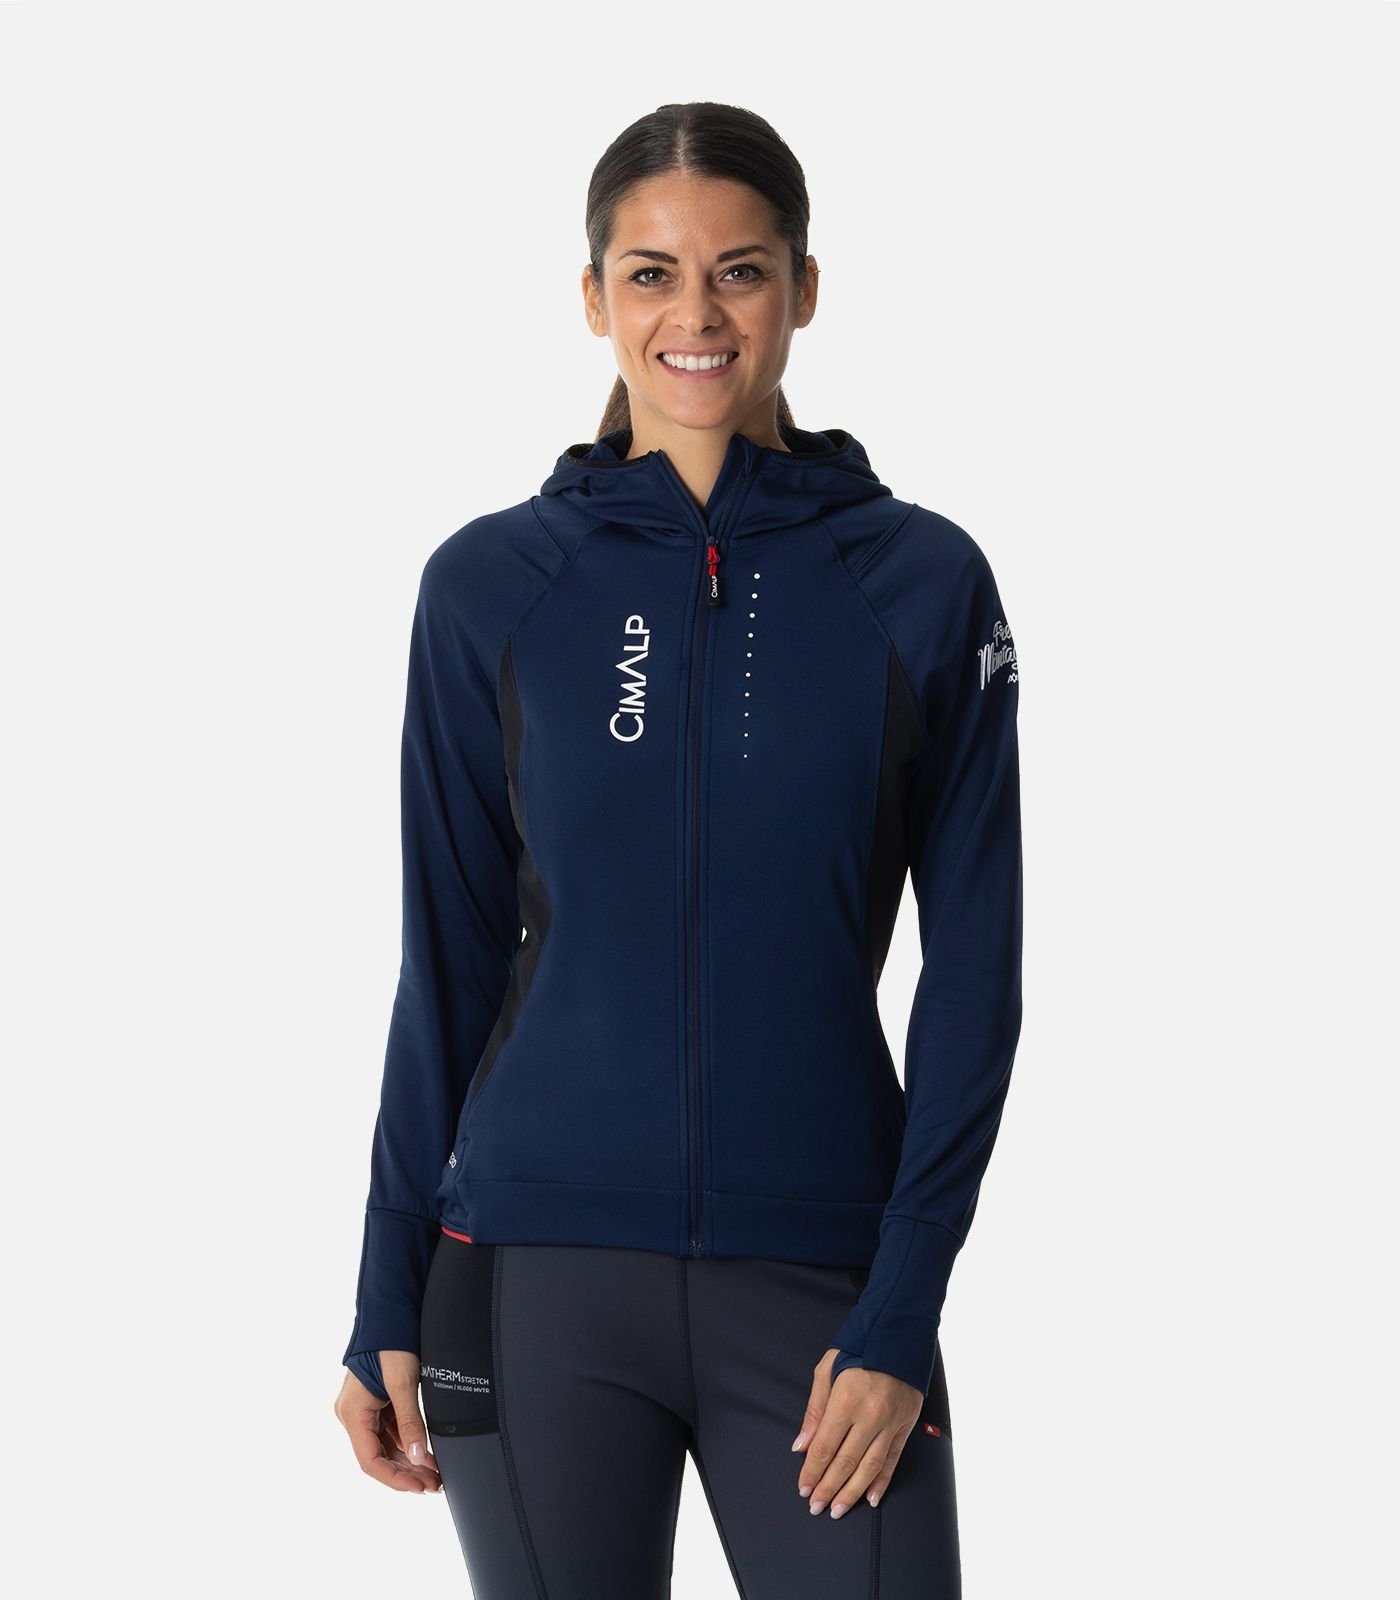 Thermal Trail Running jacket